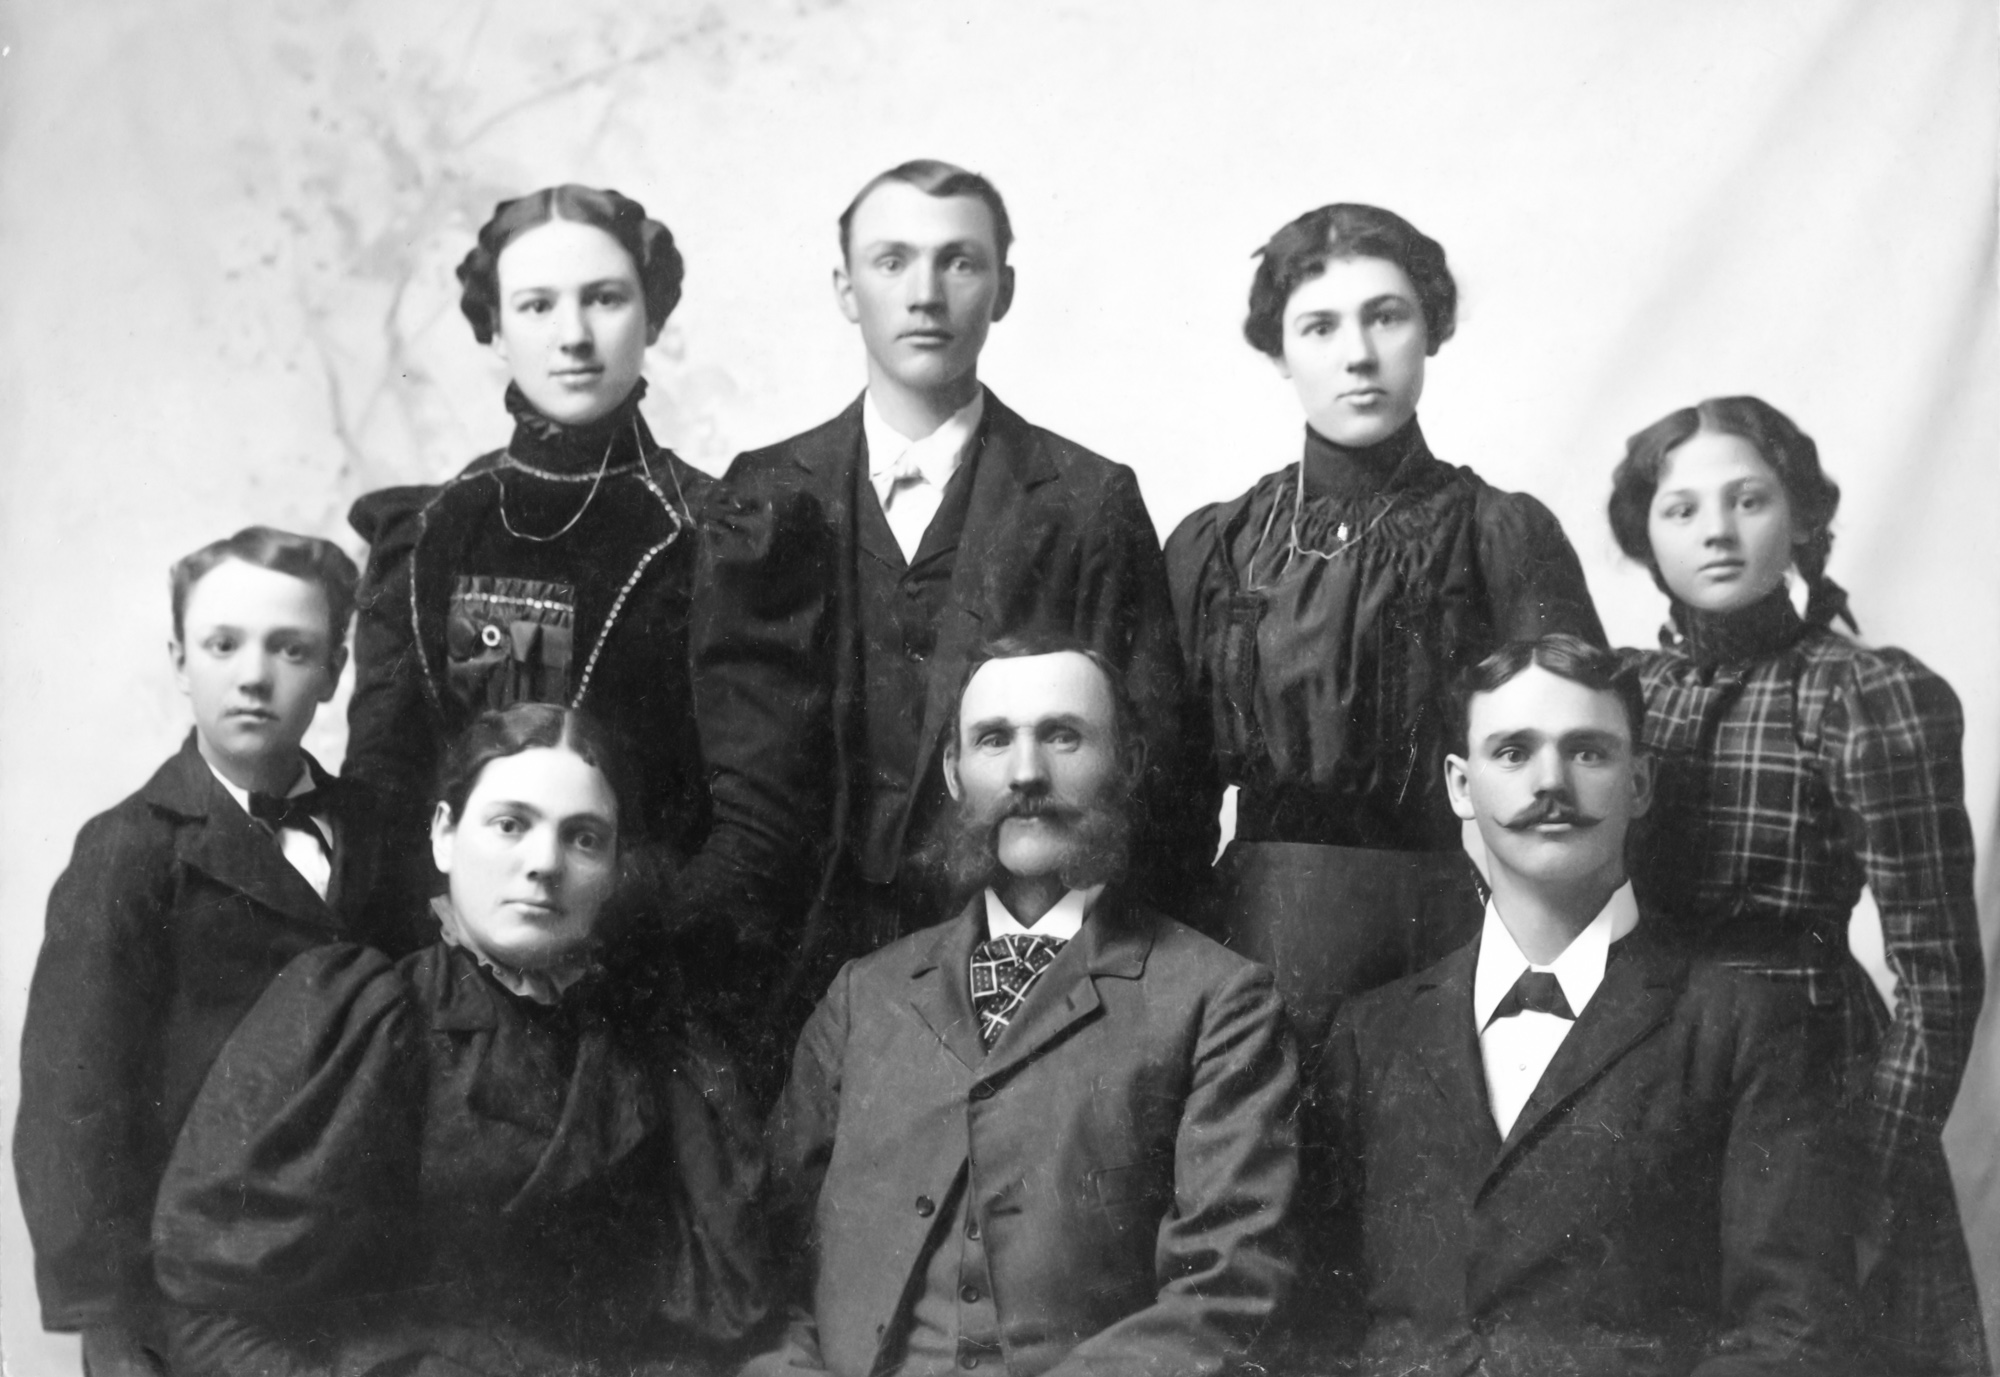 Dauth Family Archive - The Zelotes Yeaton Family Portrait